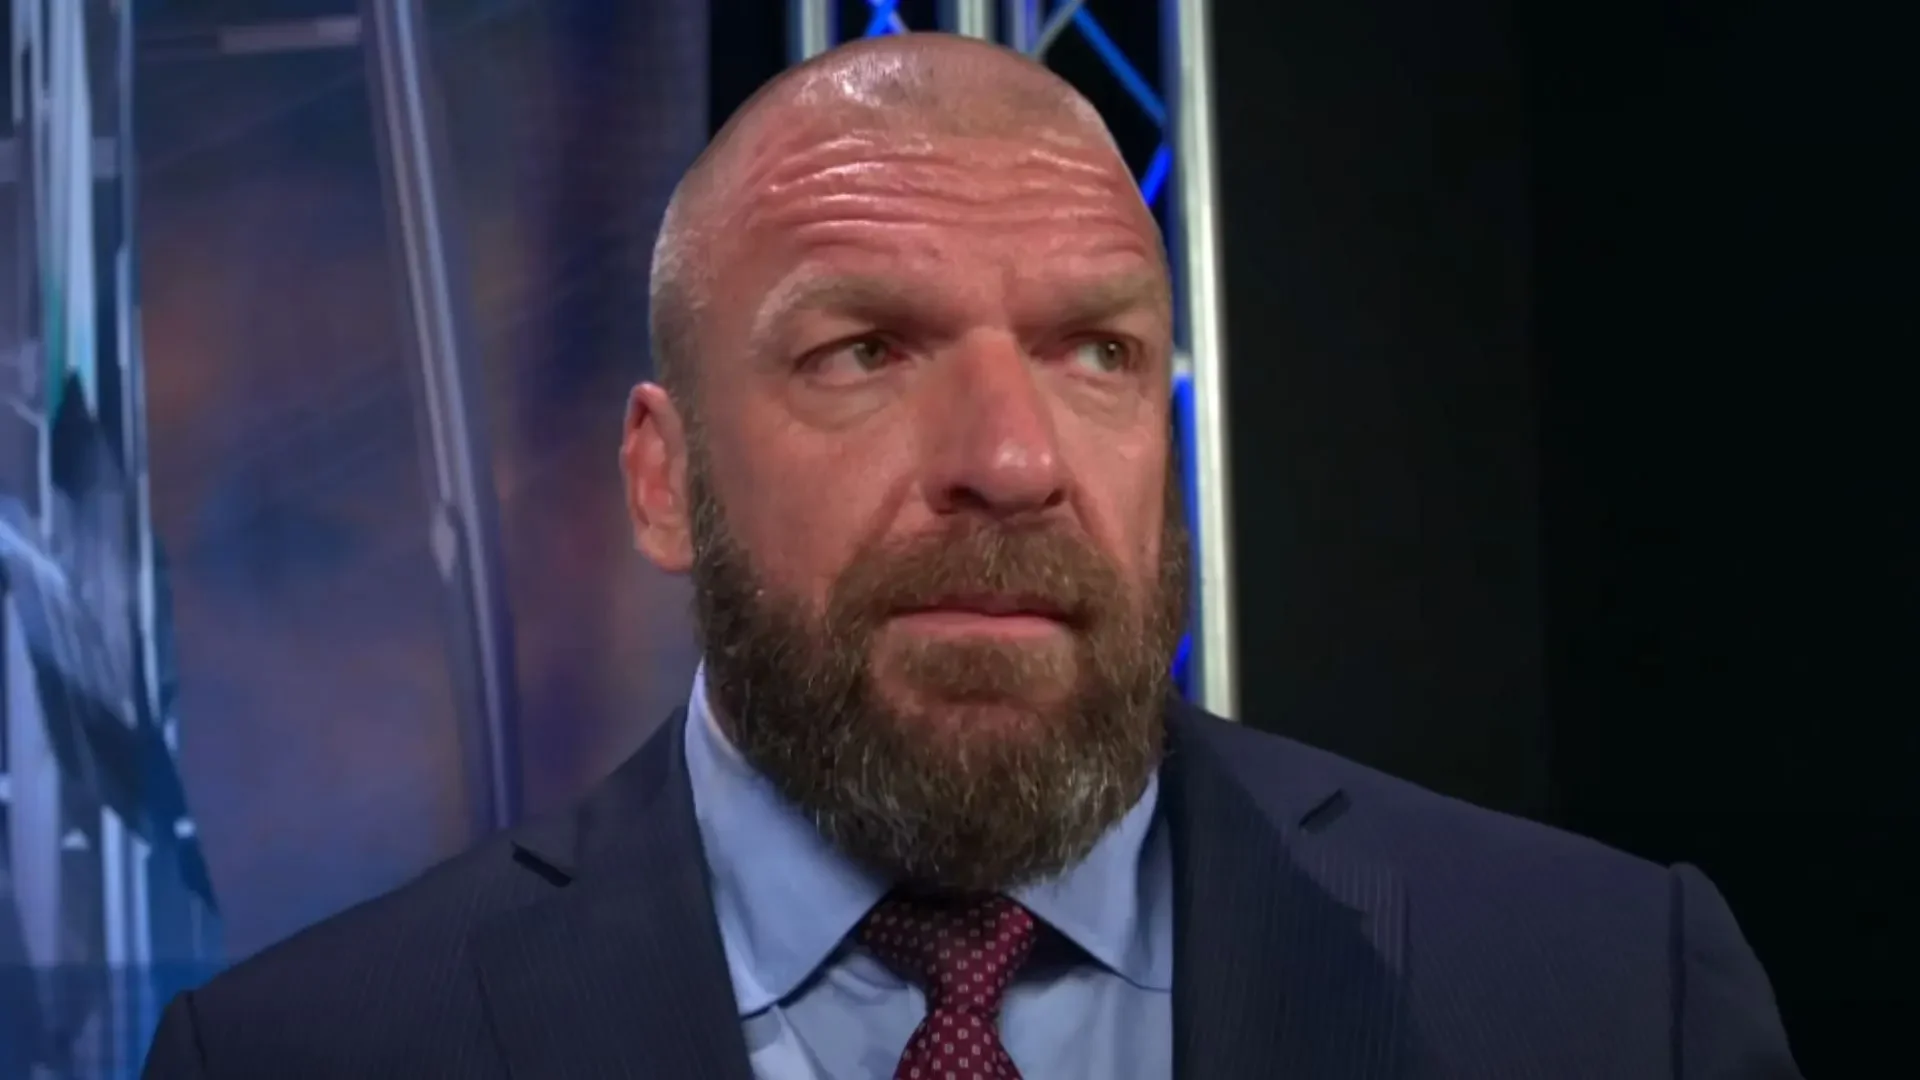 Triple H Reportedly Tests Positive For COVID-19, Steps Away From WWE Duties